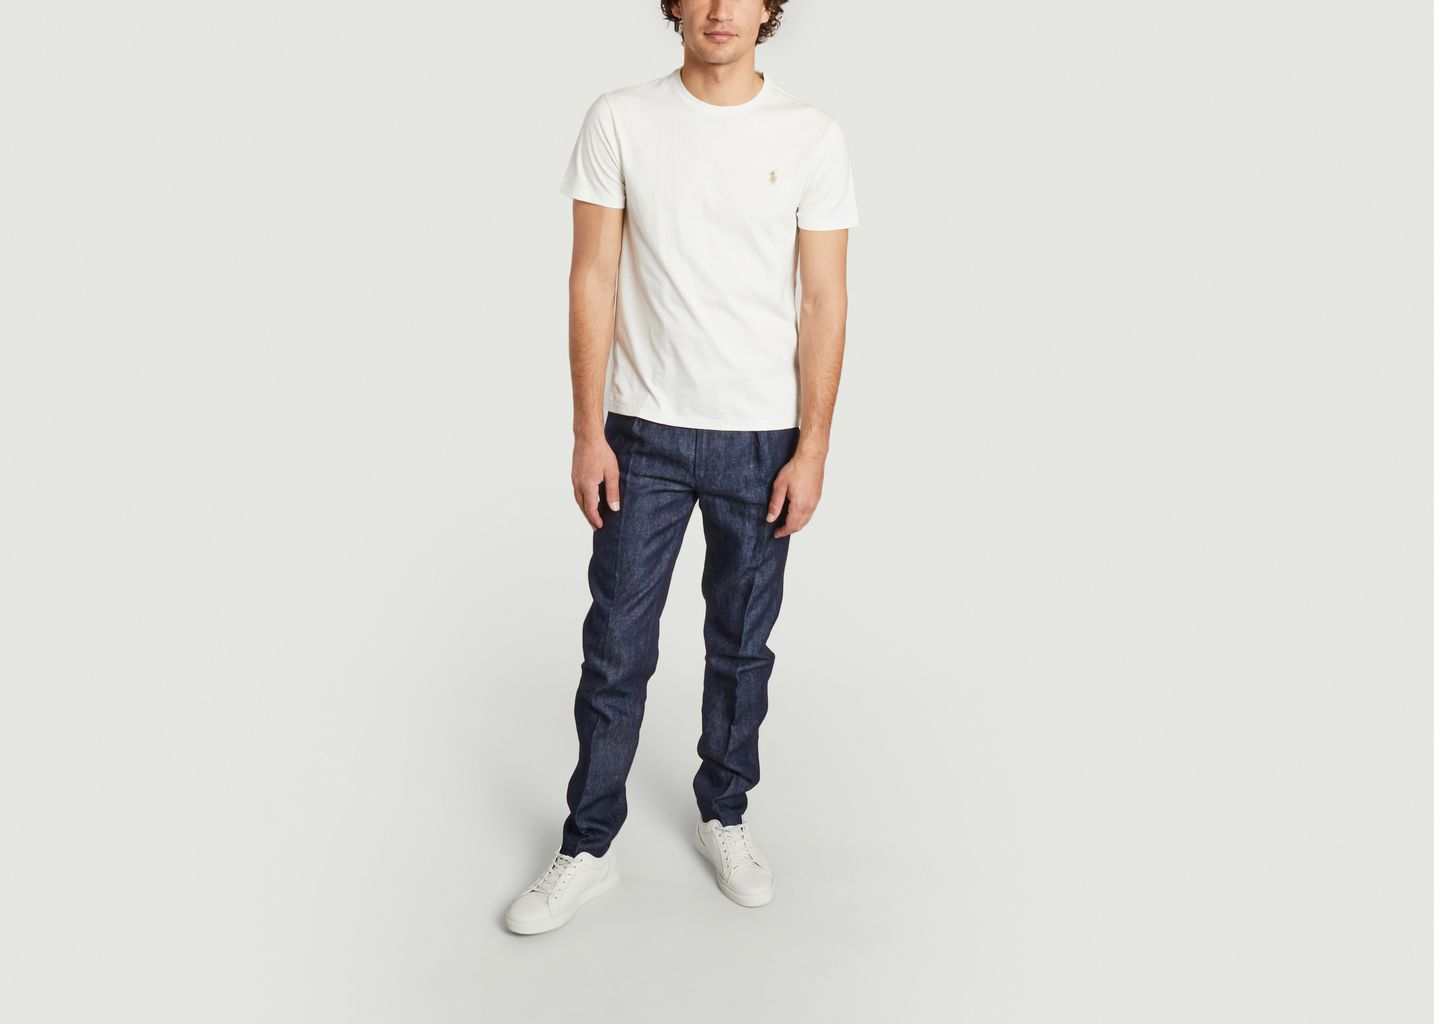 Linen chino - The Chino Revived